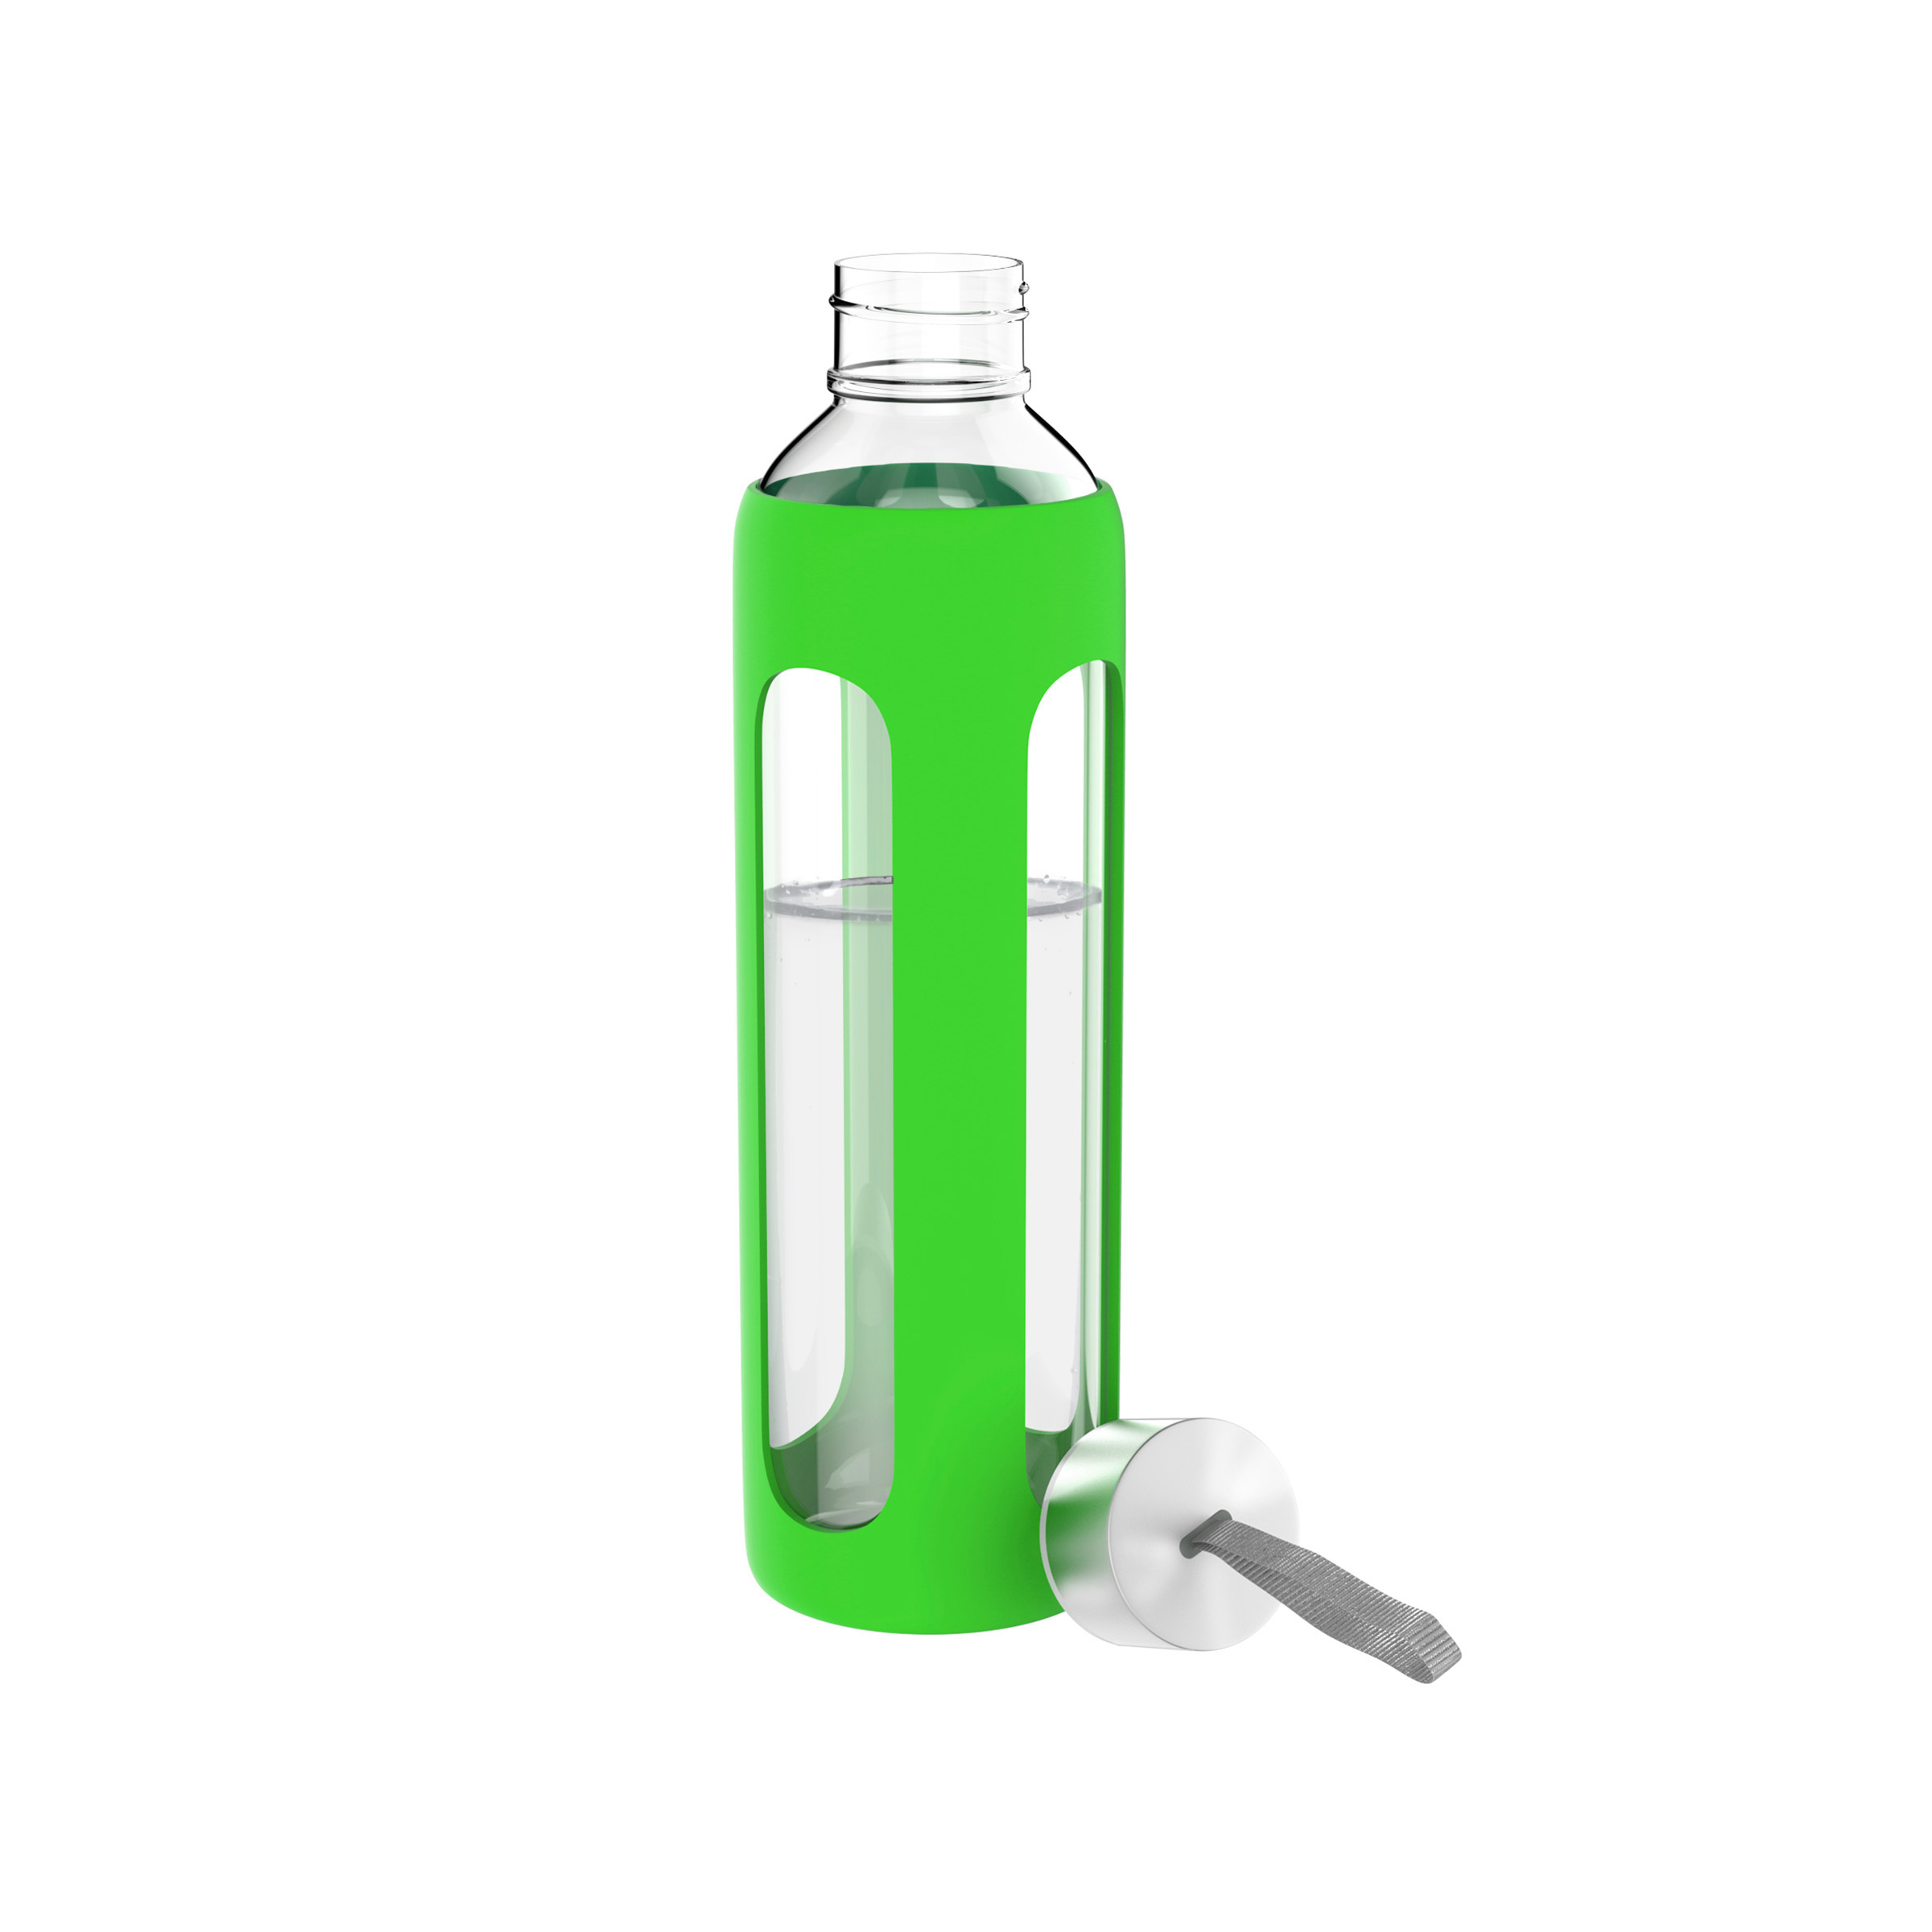 Glass Reusable Water Bottle 20 Oz BPA Free Green Silicone Sleeve Leak Proof Lid